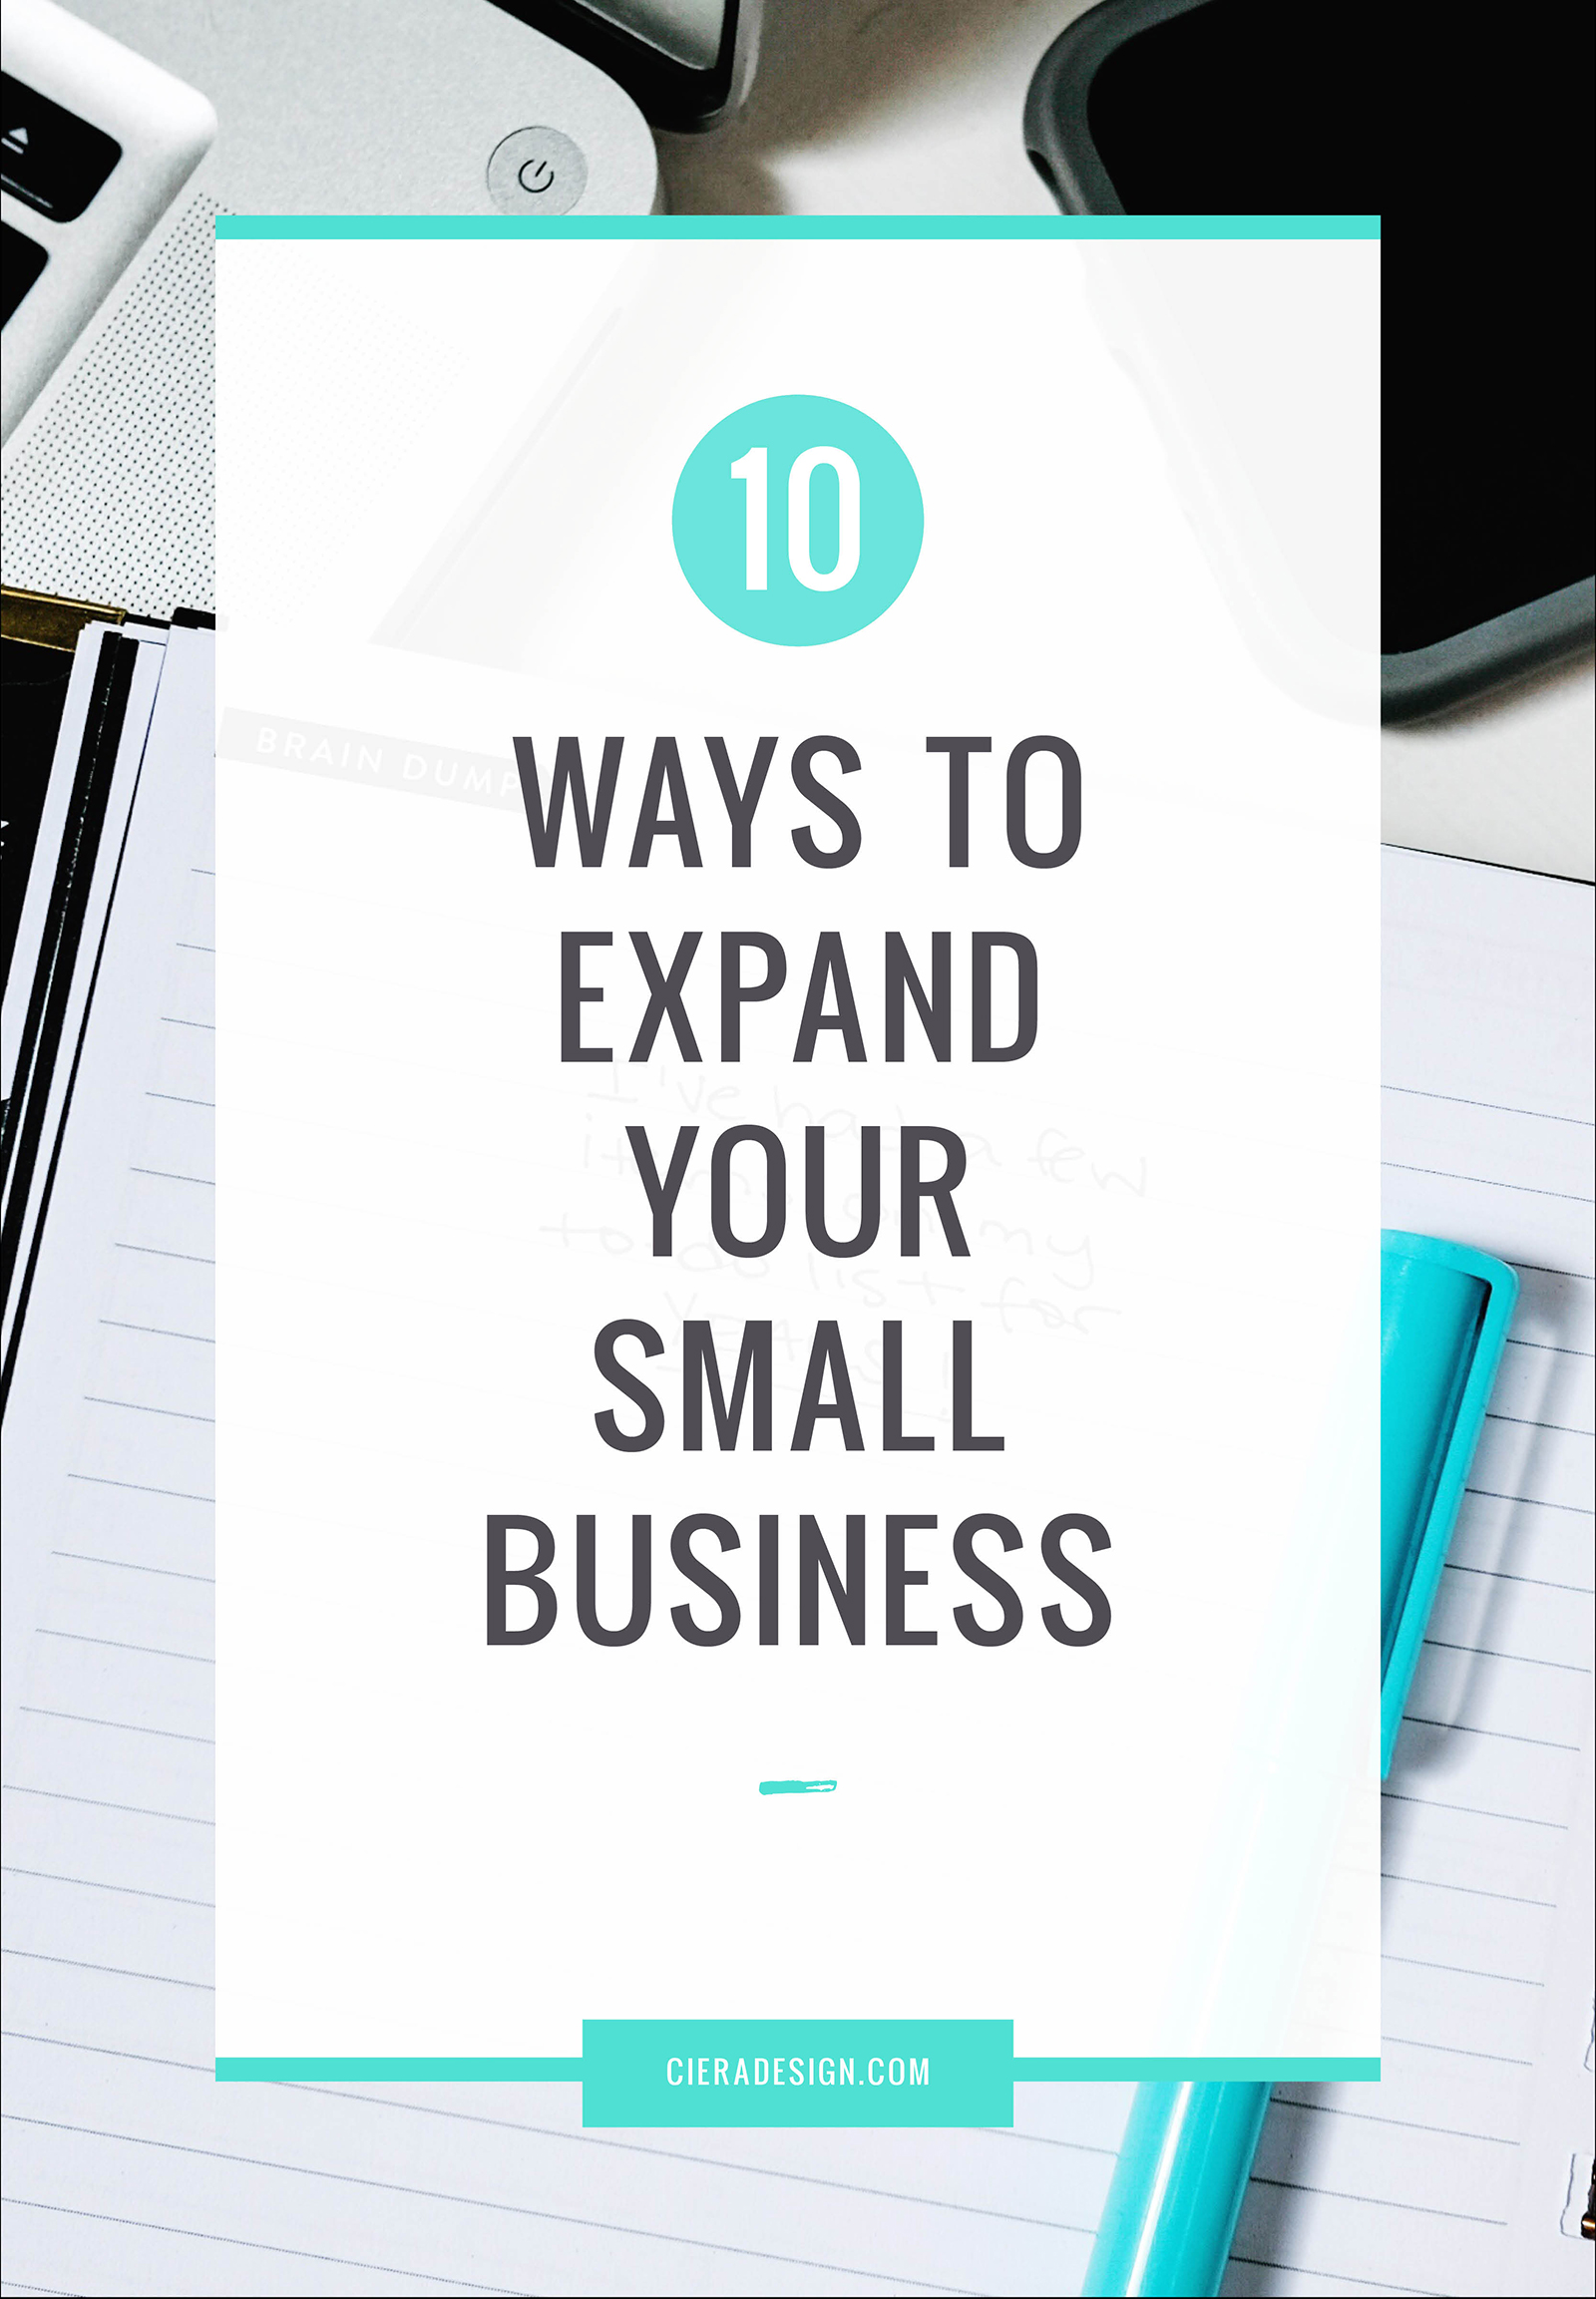 Here are ten things that can help you to expand your small business.